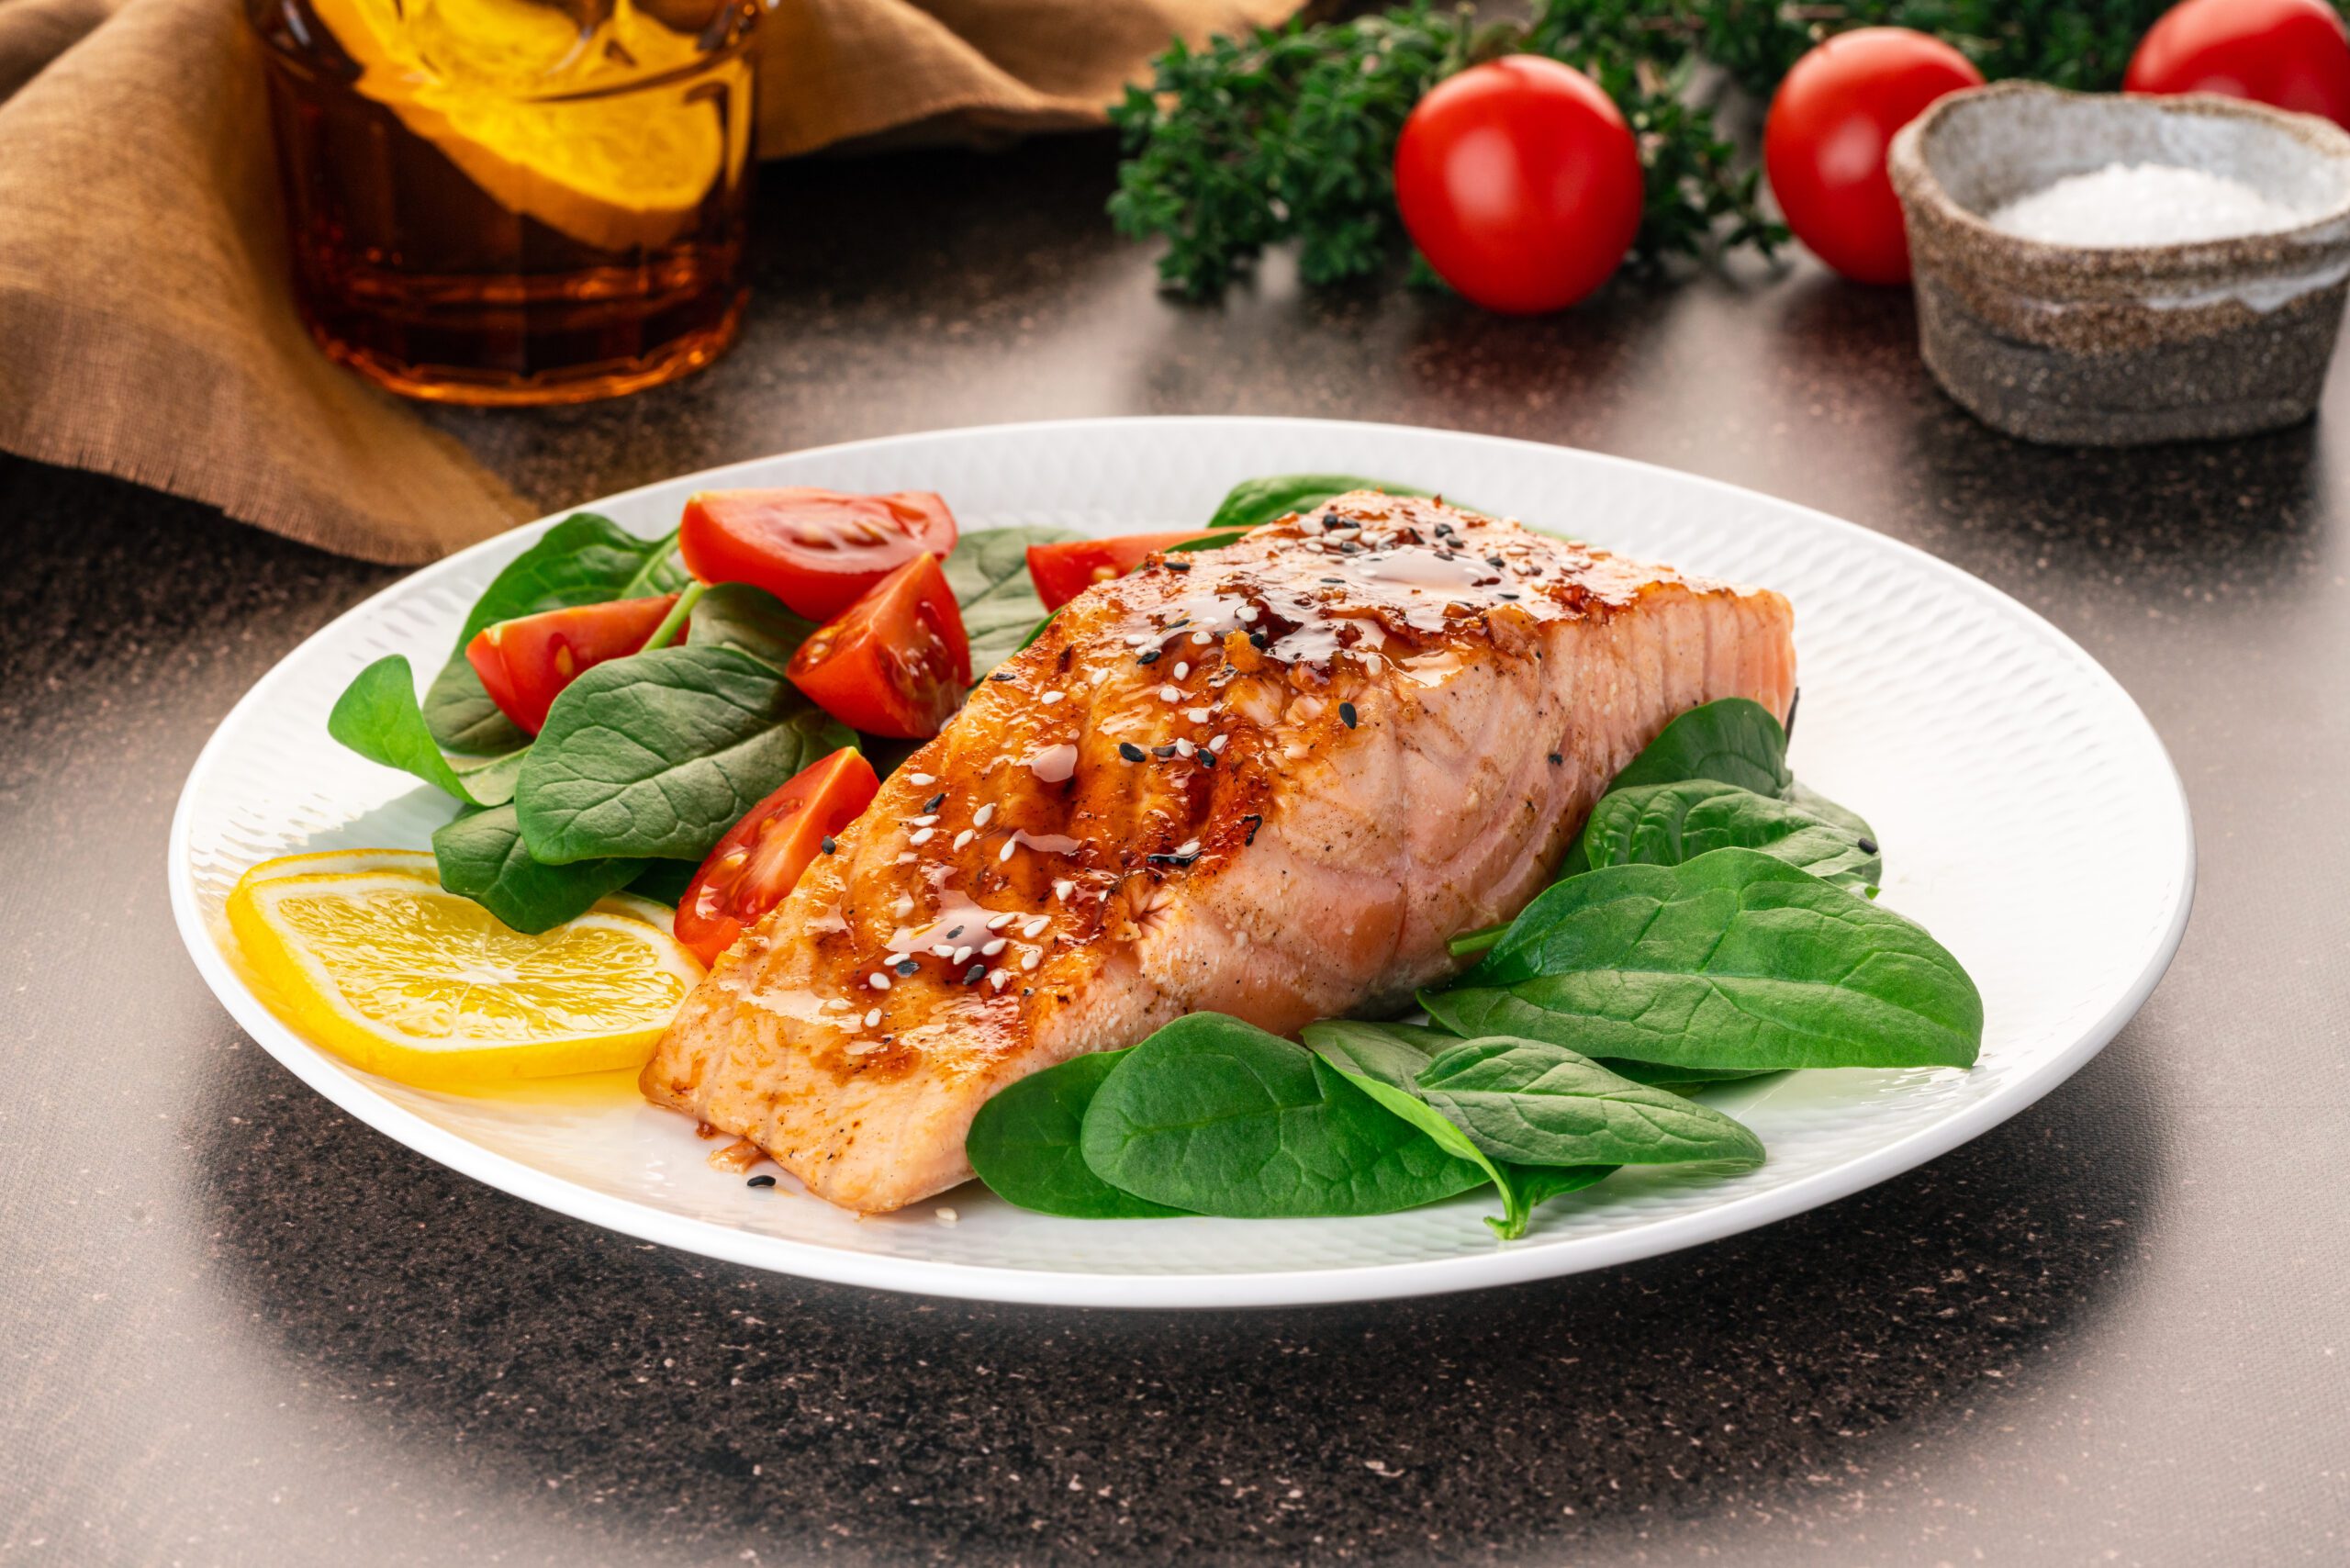 Salmon is just one great source of protein.